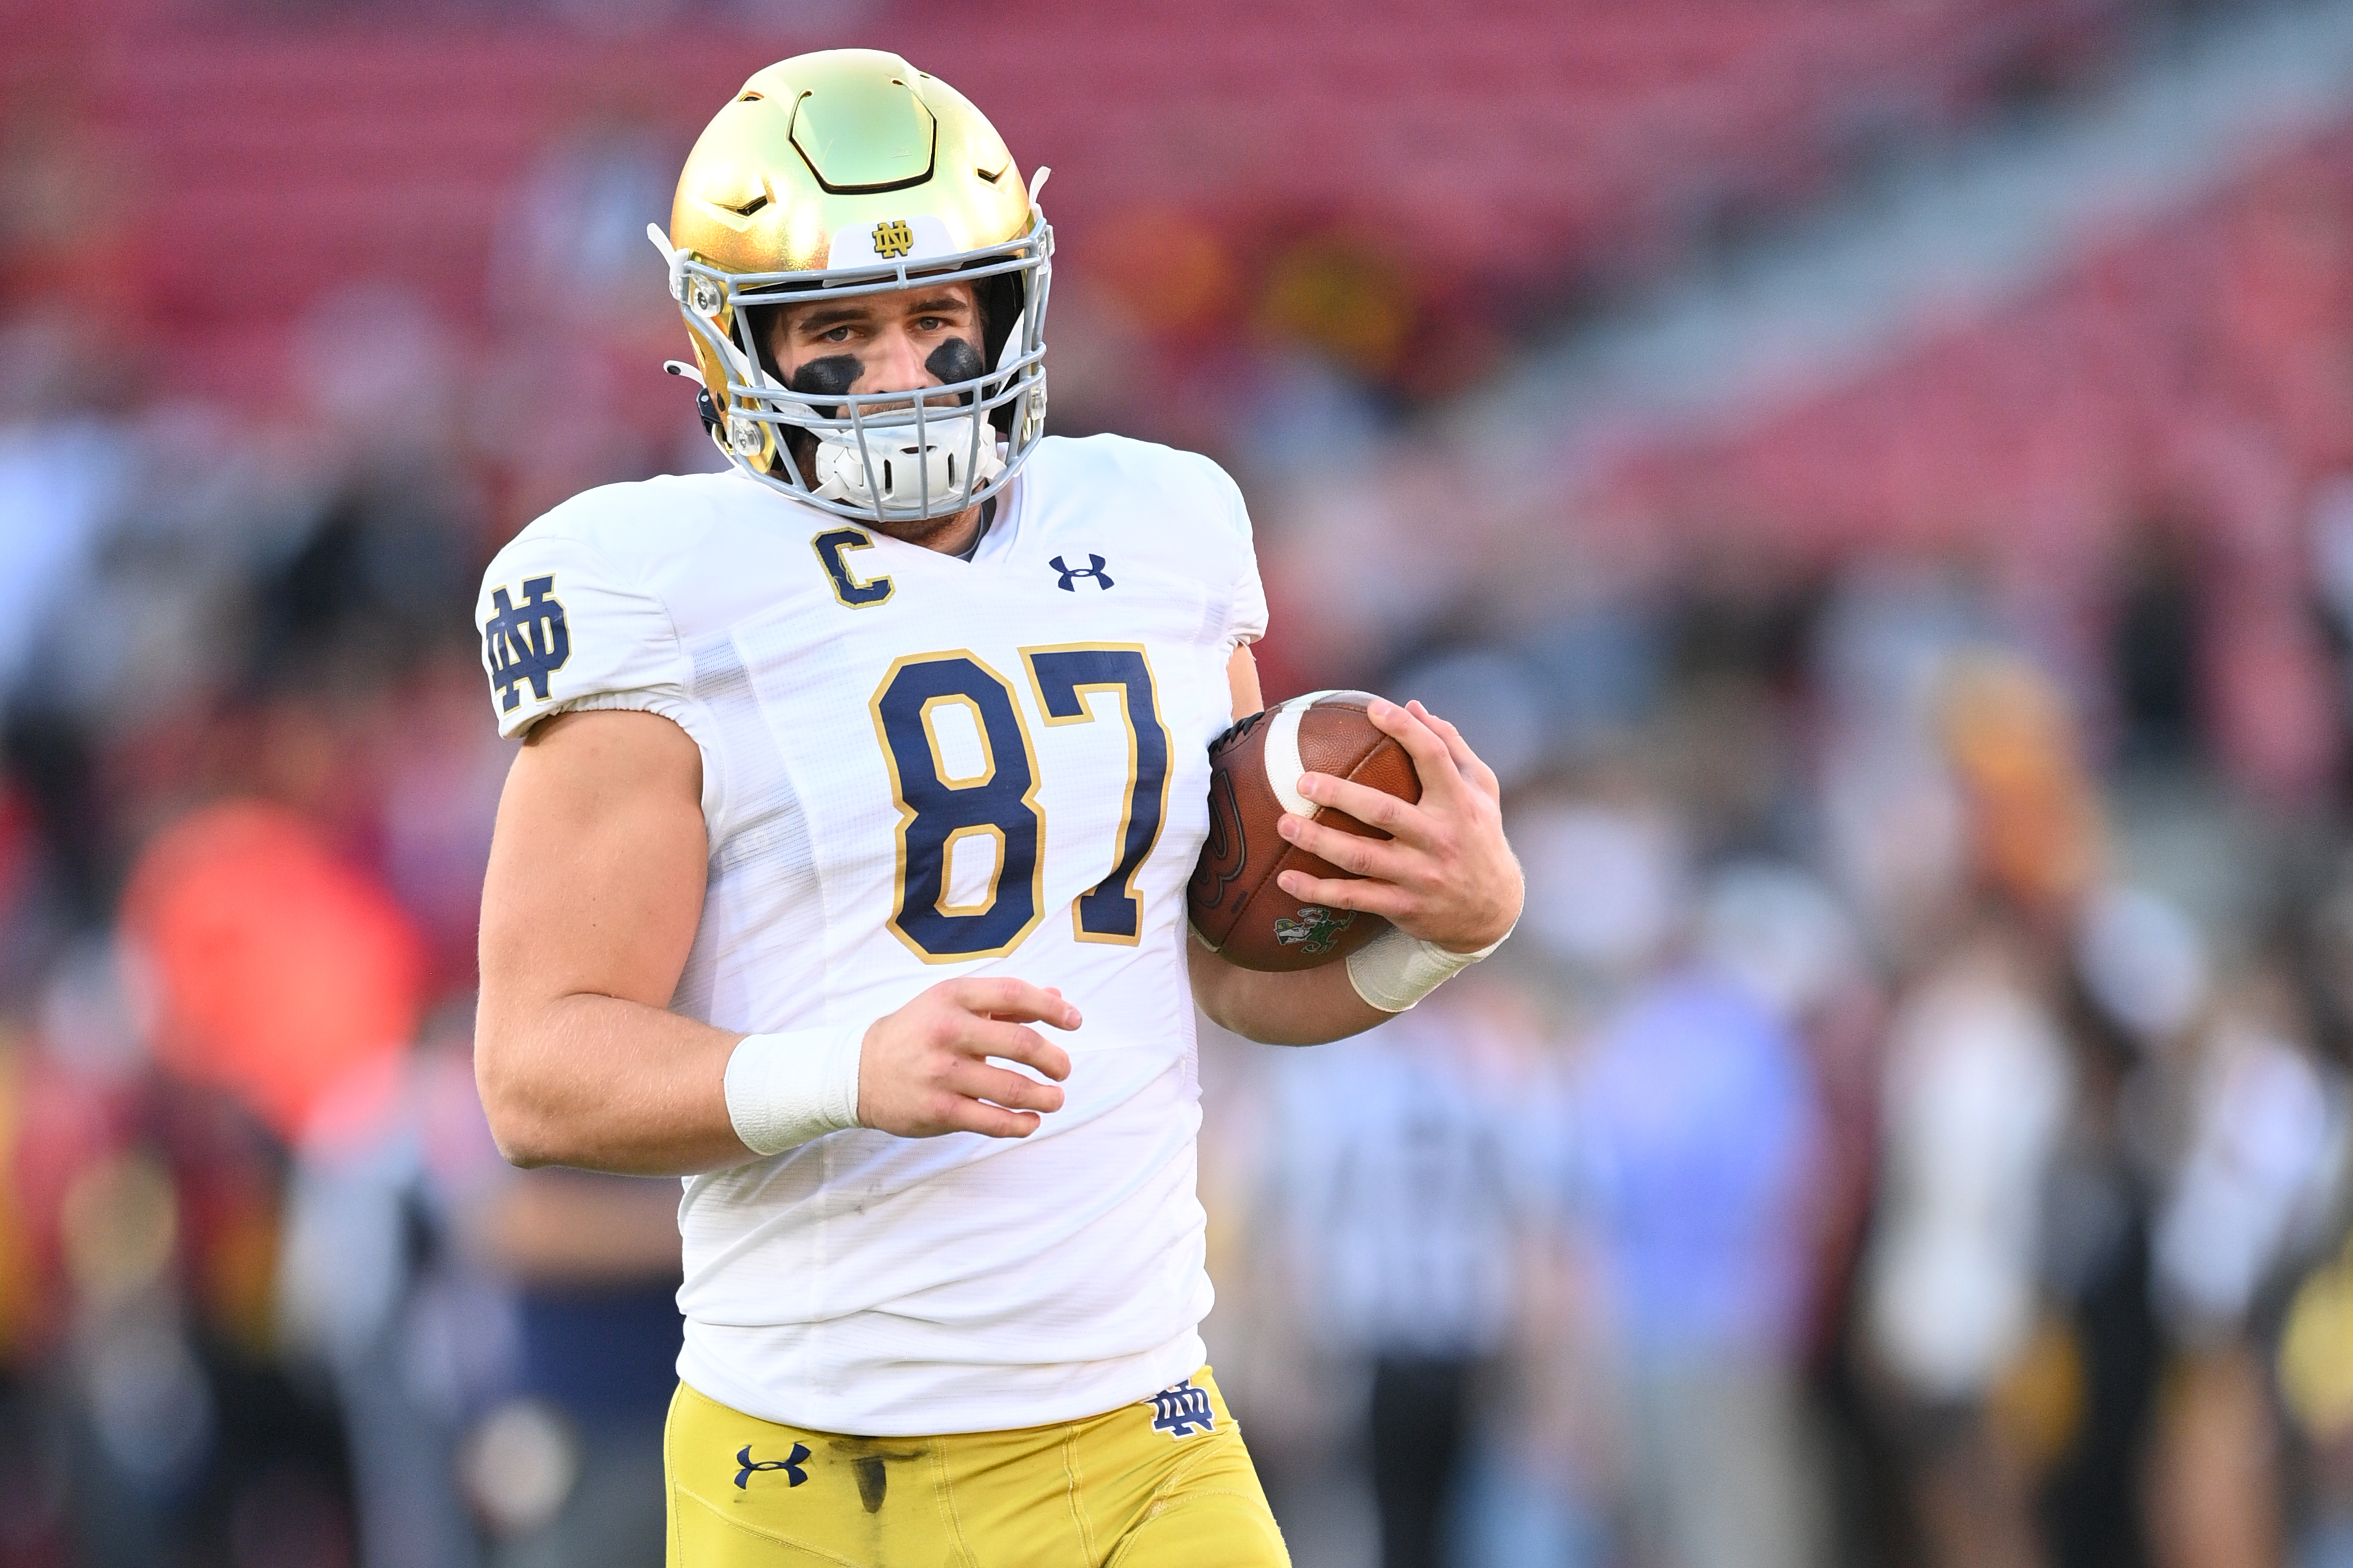 COLLEGE FOOTBALL: NOV 26 Notre Dame at USC